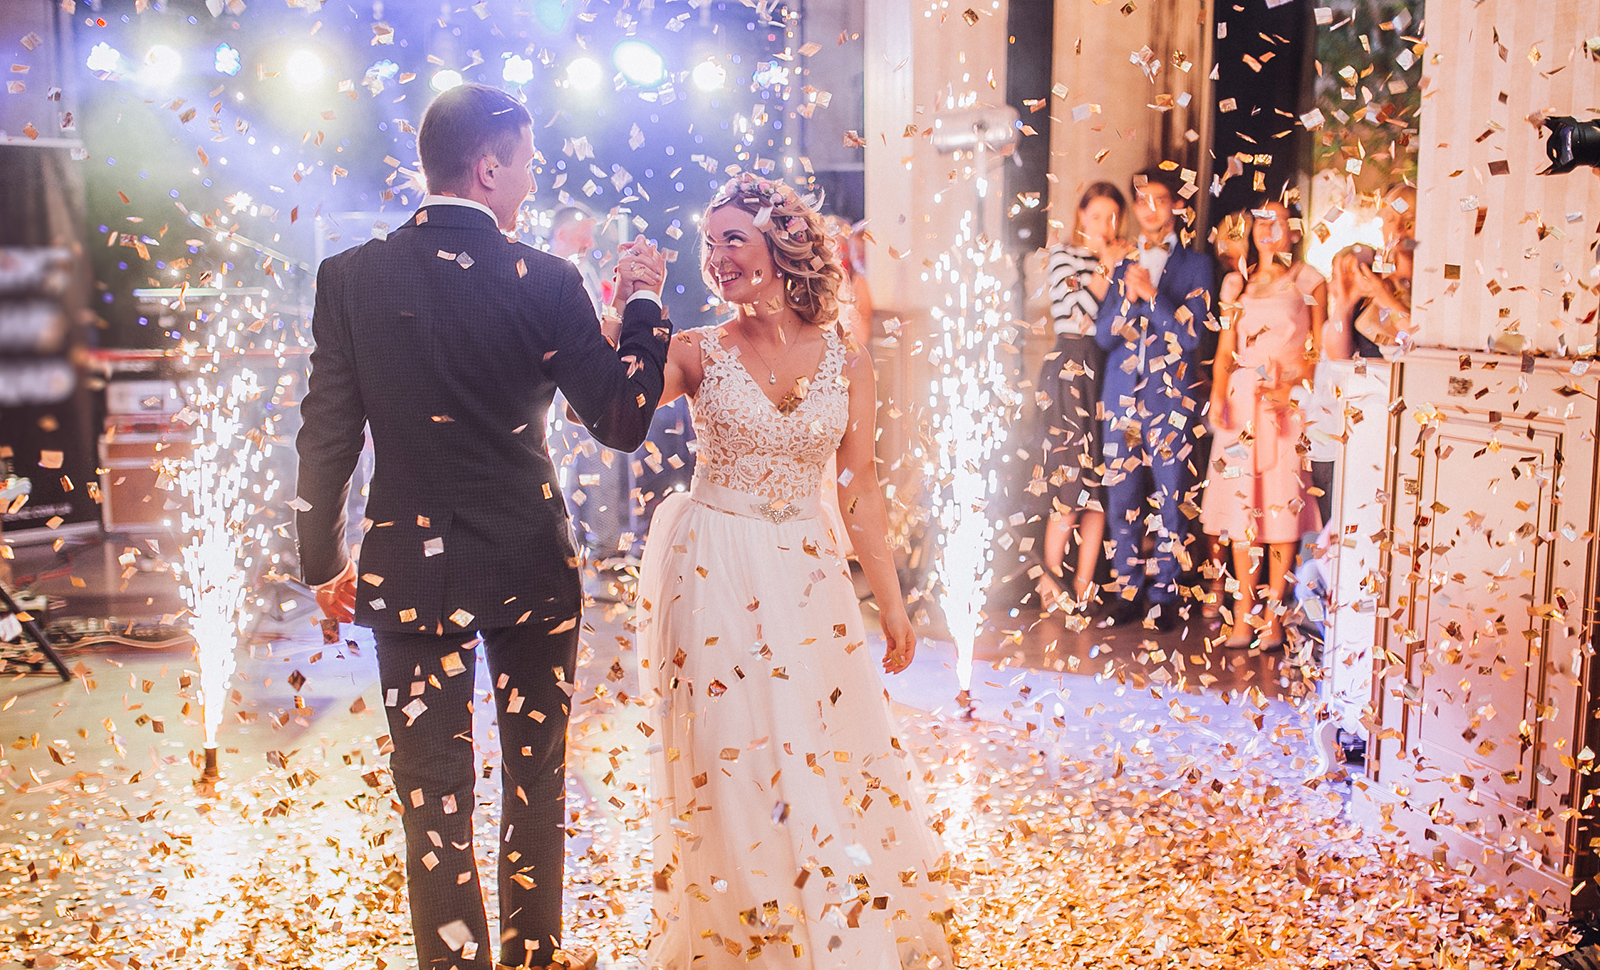 bride and groom celebrating on dancefloor with confetti